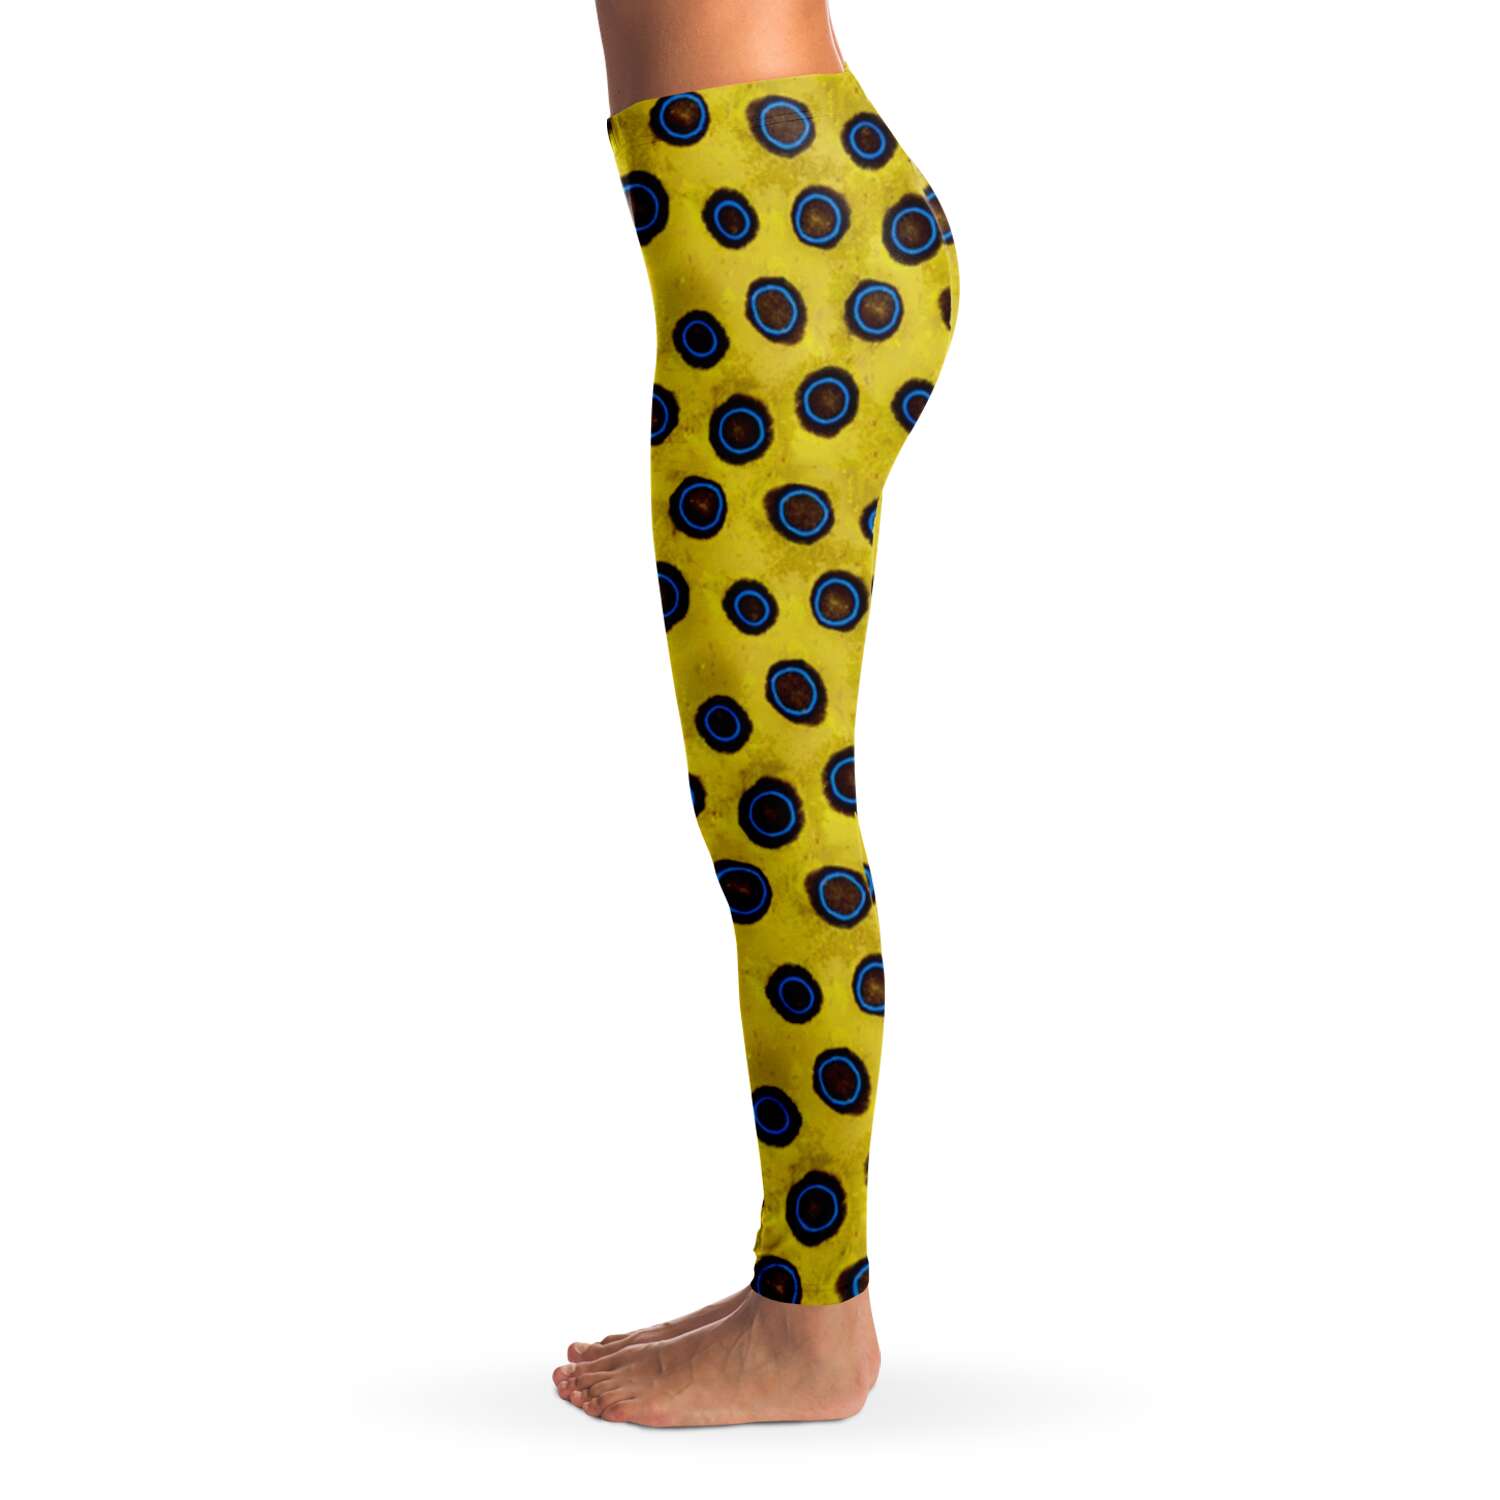 Side view on model of blue-ringed octopus leggings for scuba diving, yoga and running